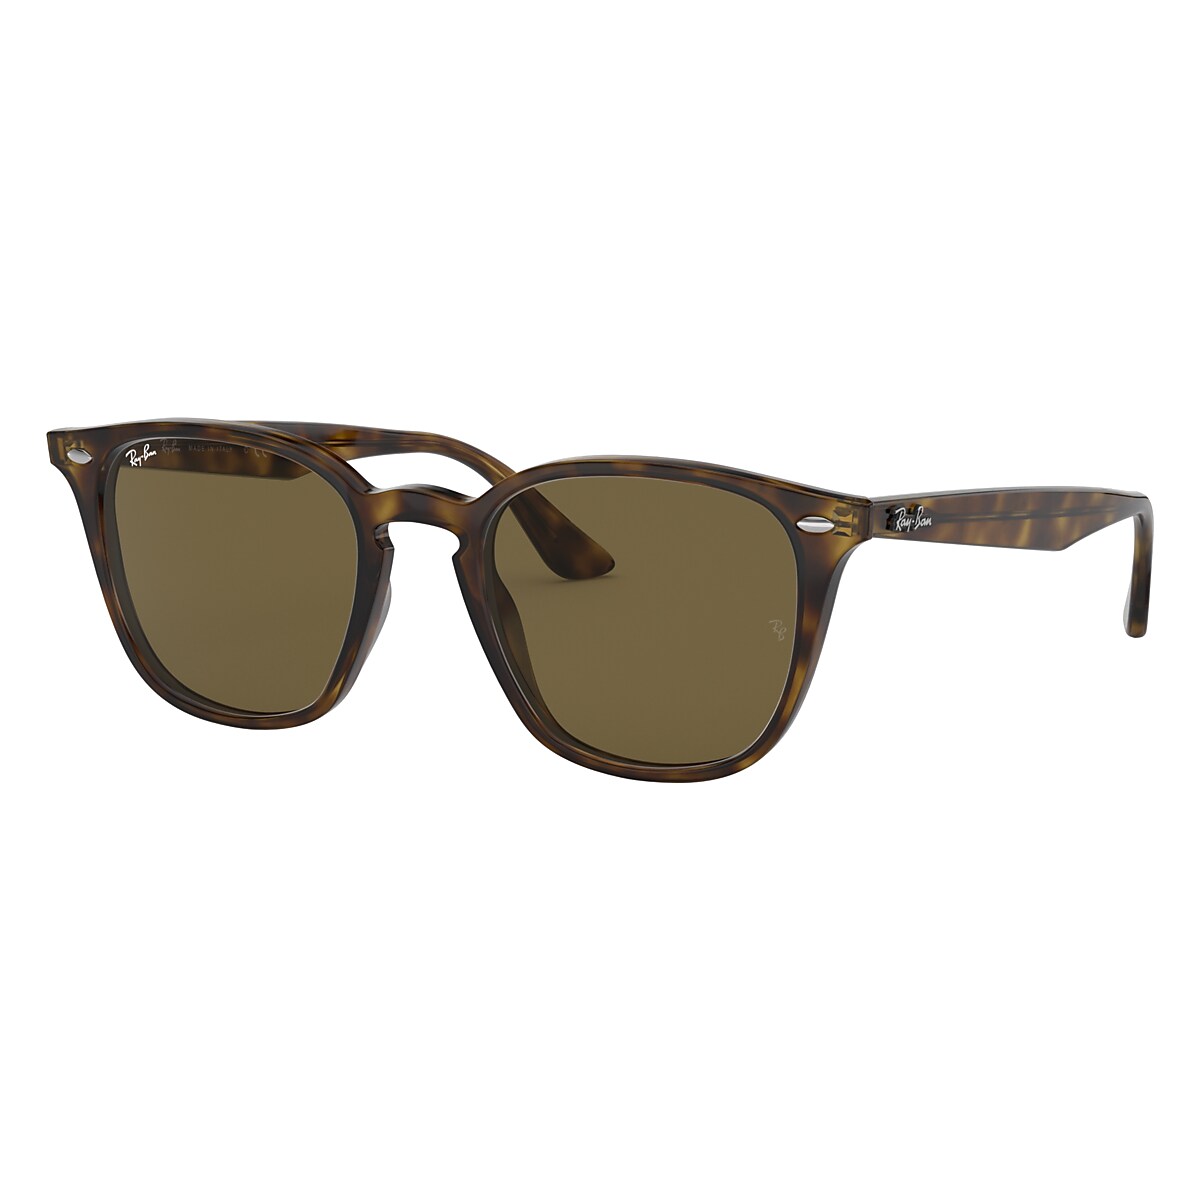 Rb4258 Sunglasses in Light Havana and Brown - RB4258F - Ray-Ban